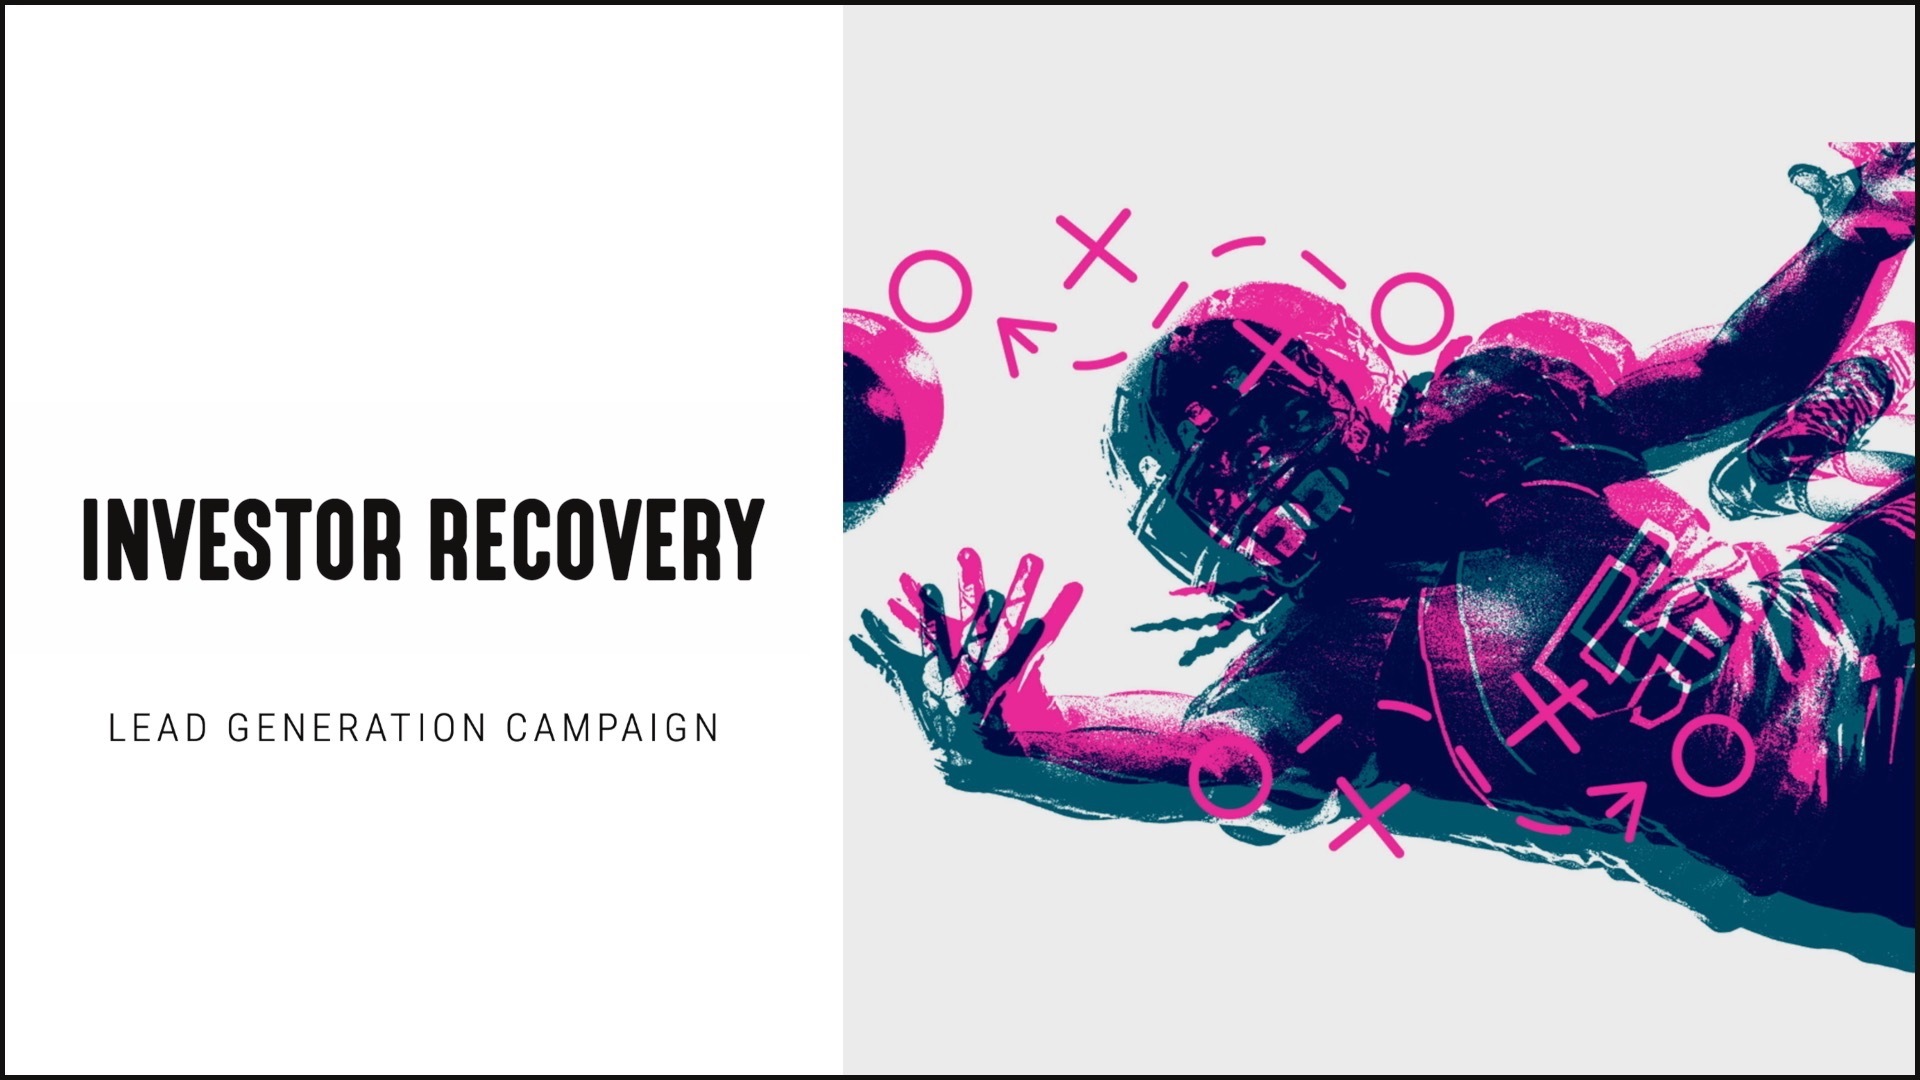 [NEW] Investor Recovery - Lead Generation Campaign for Financial Advisors